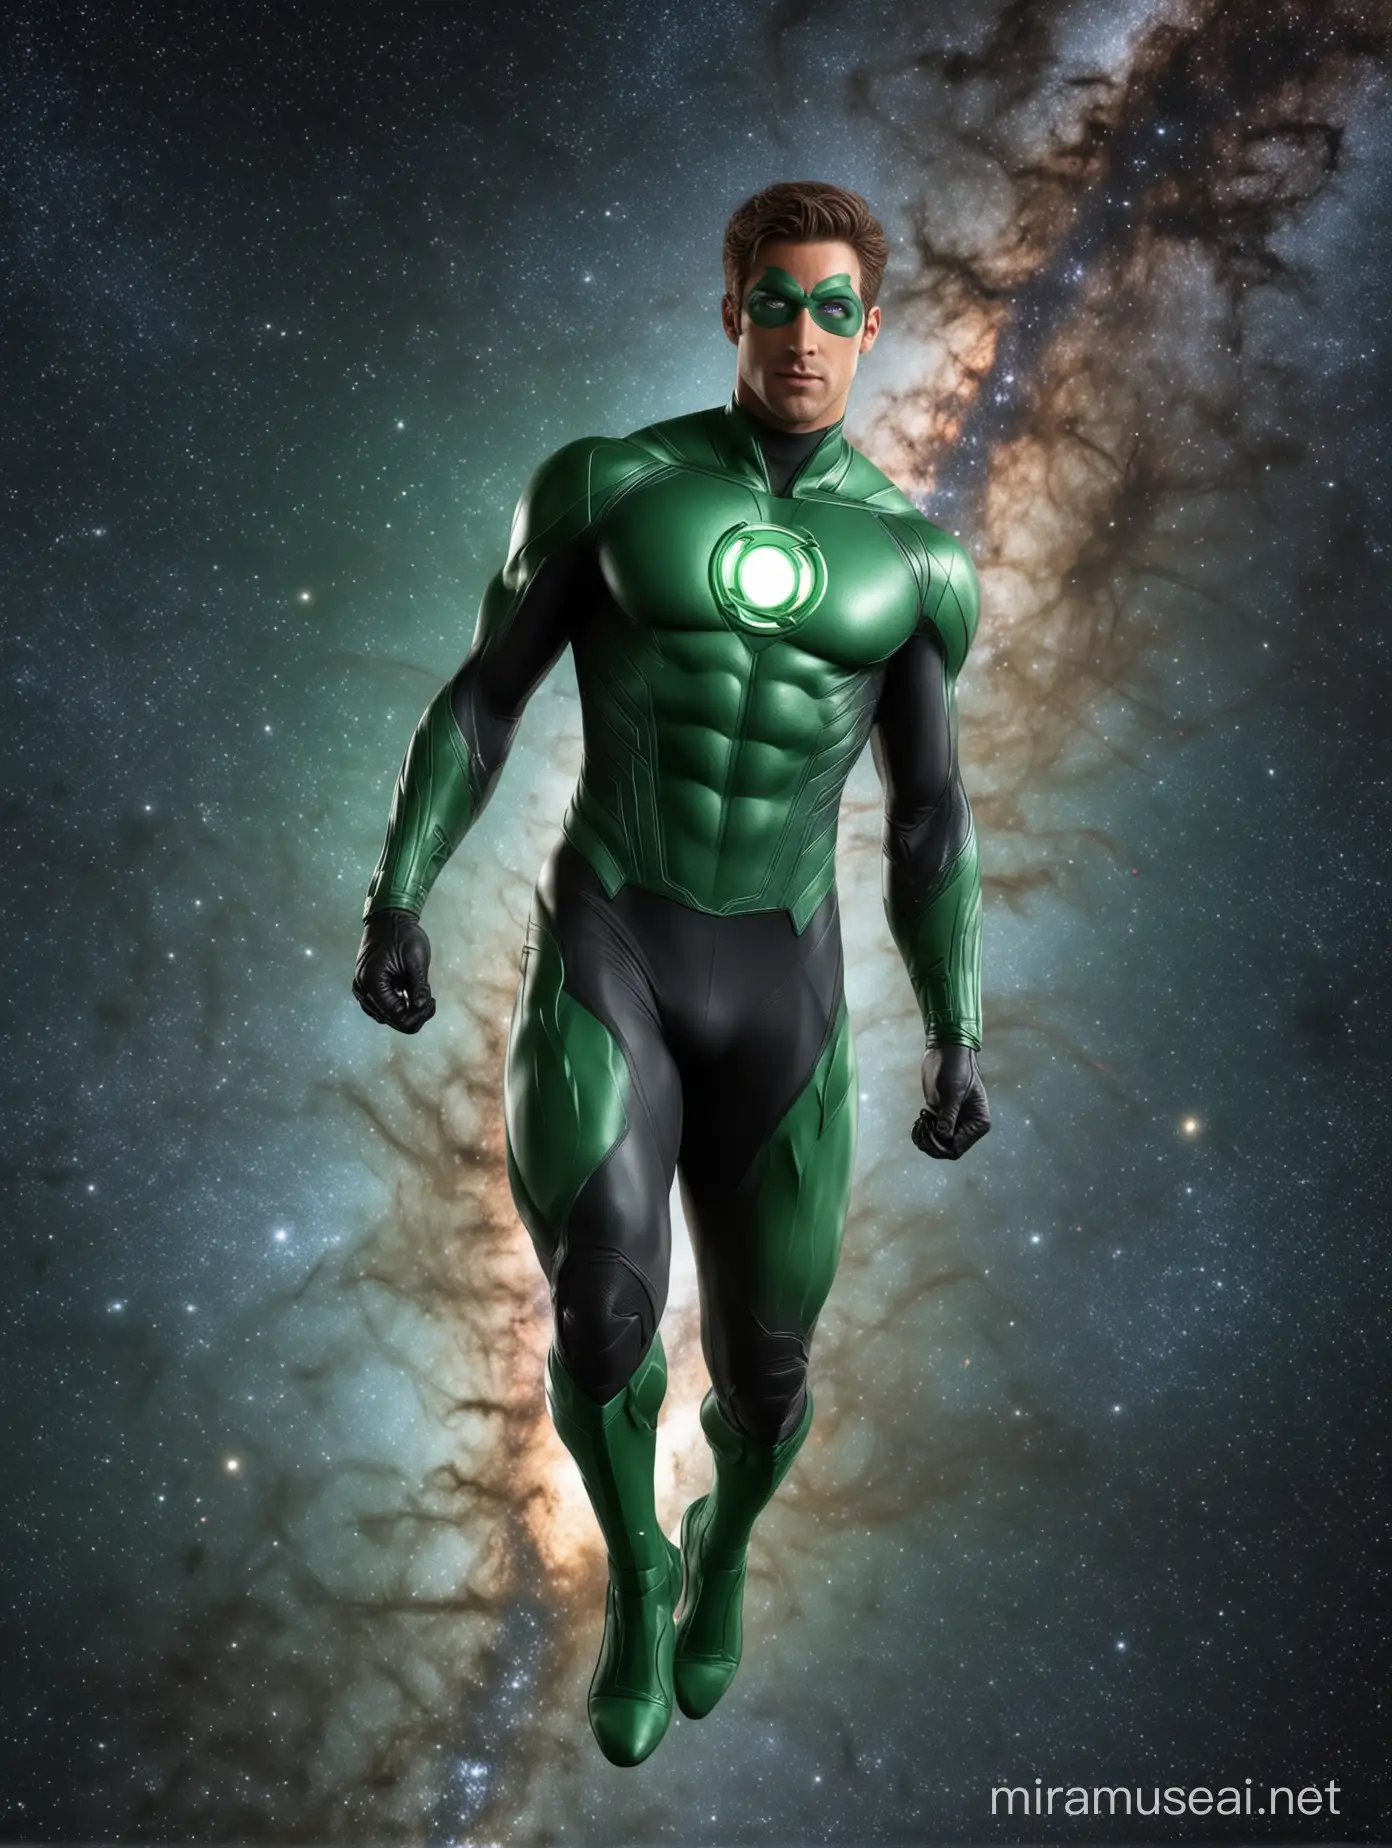 Handsome Green Lantern Flying in Cosmic Space